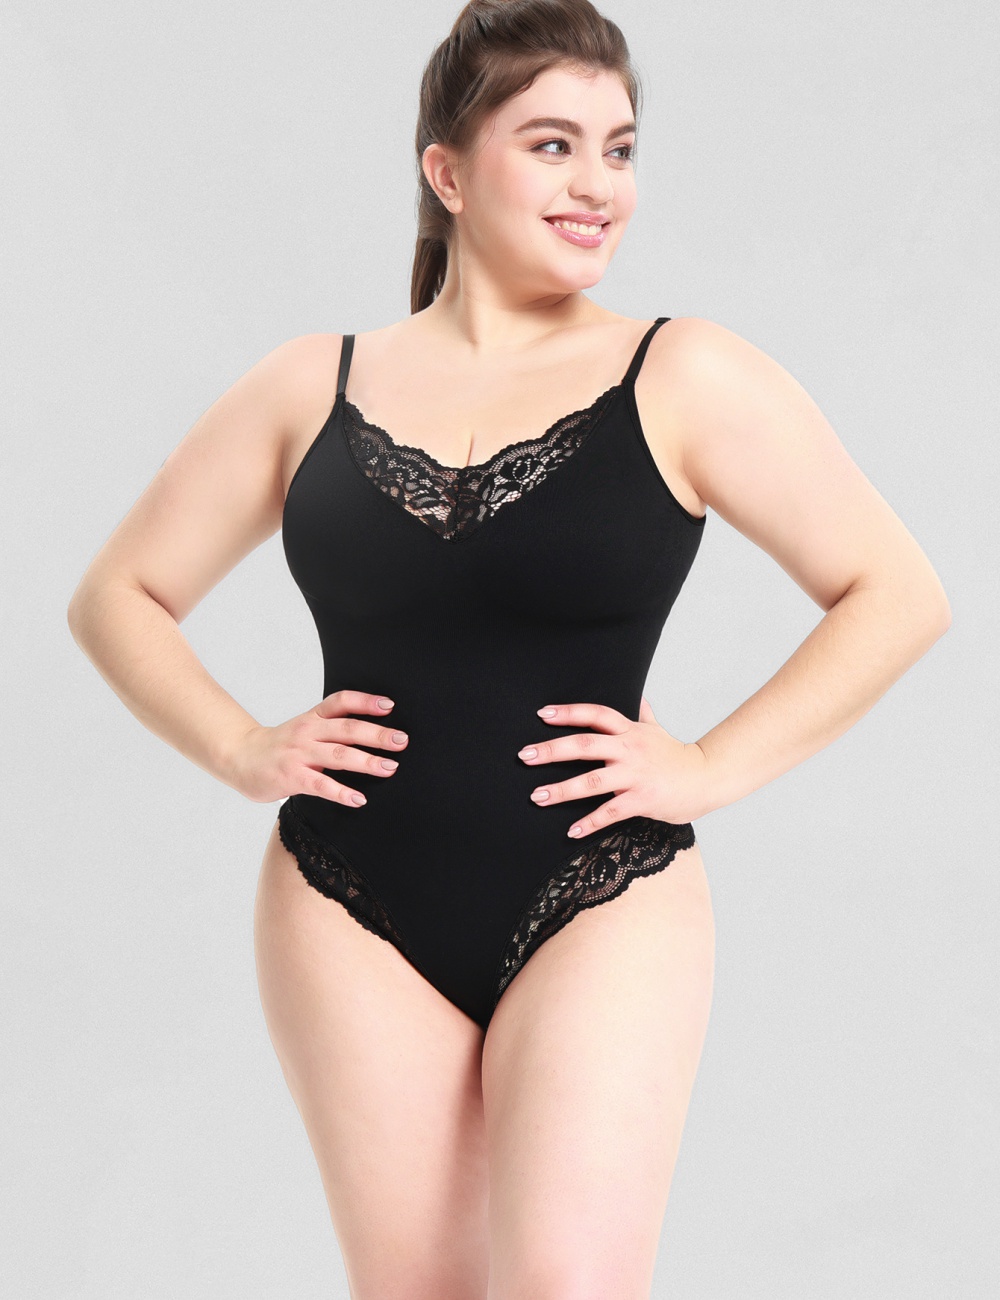 Body sculpting screw thread tights lace leotard for women